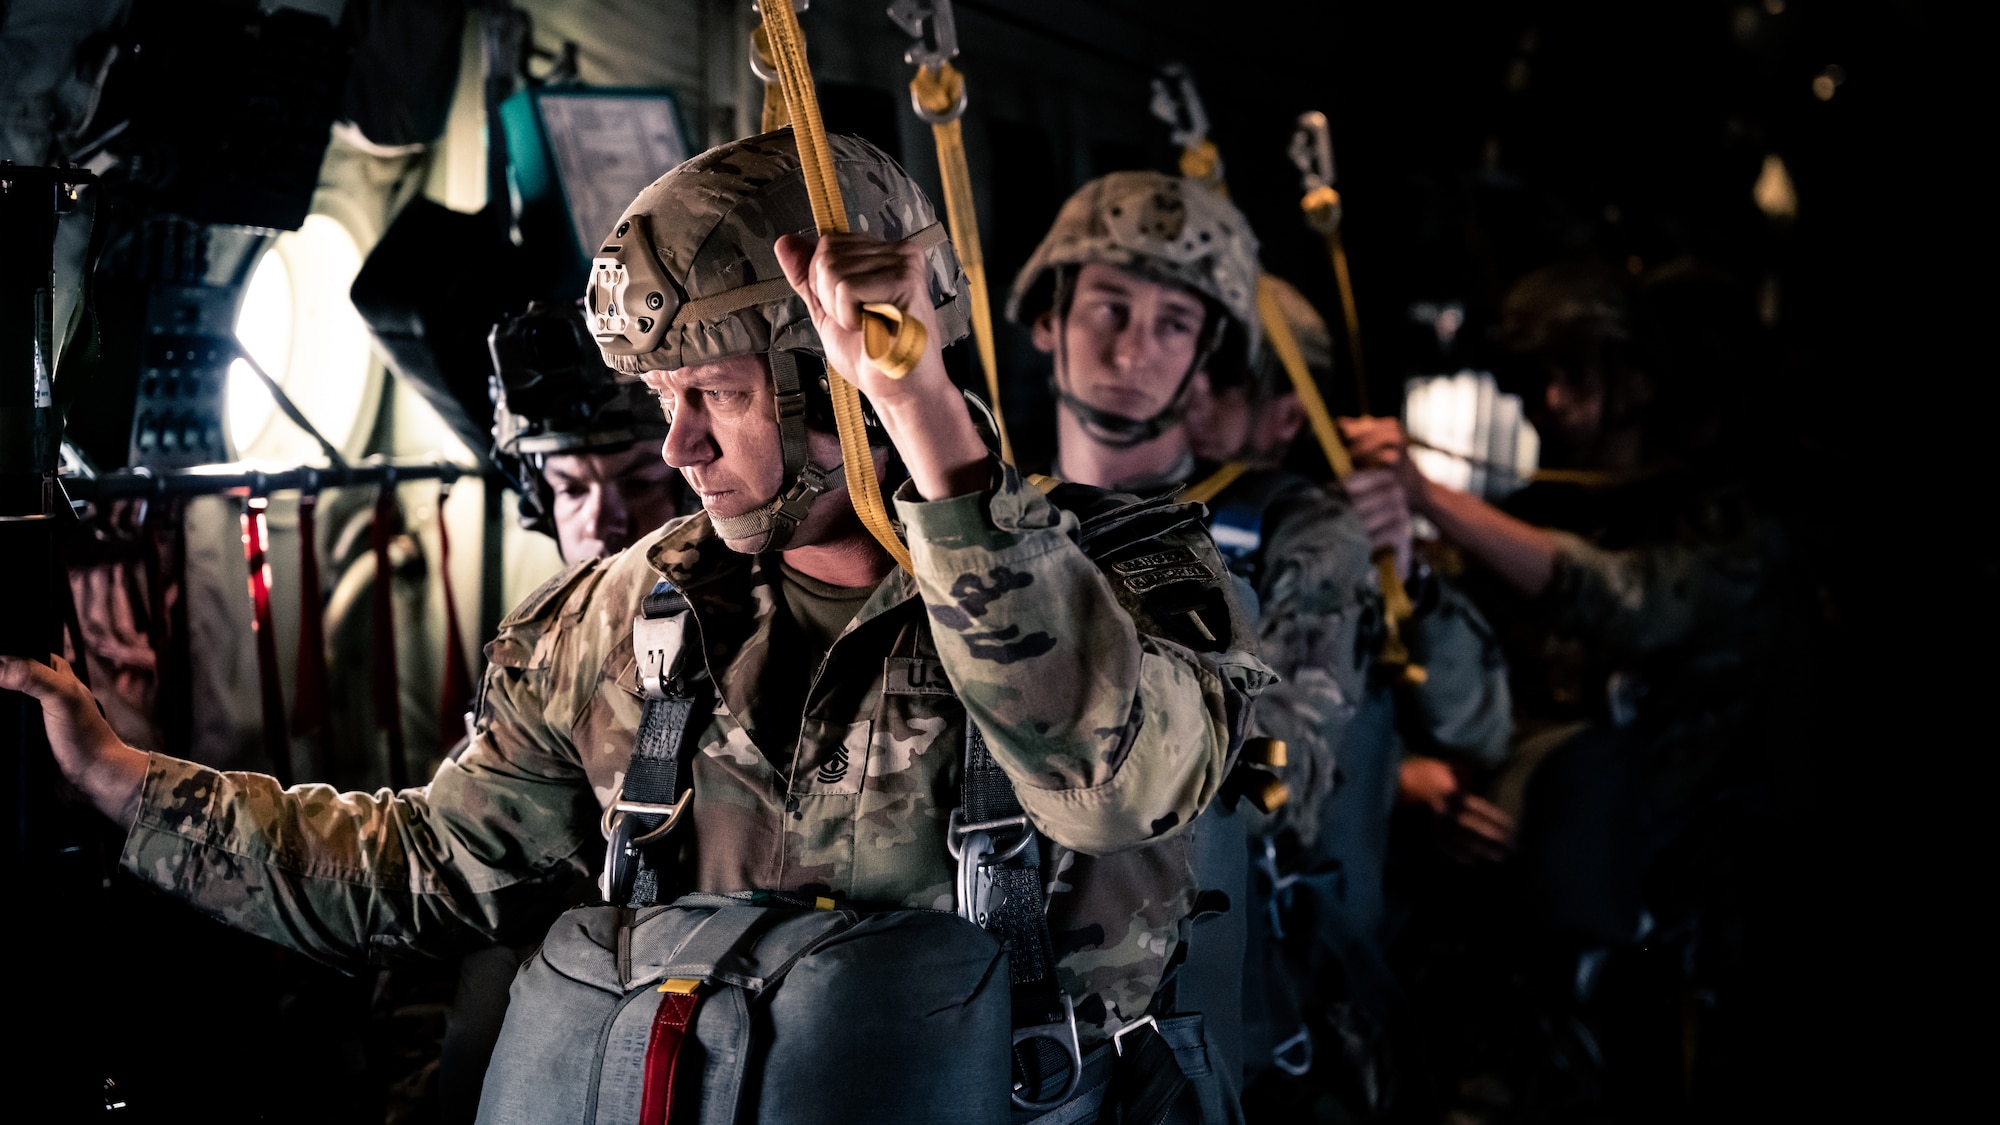 Texas Army National Guard Soldiers assigned to the 1st Battalion, 143rd Infantry Airborne Regiment prepare to jump from a C-130J Super Hercules from the 386th Air Expeditionary Wing during an airborne operation over Egypt in support of exercise Bright Star 23, Sept. 7, 2023. Bright Star 23 is a multilateral U.S. Central Command exercise held with the Arab Republic of Egypt across air, land, and sea domains that promotes and enhances regional security and cooperation, and improves interoperability in irregular warfare against hybrid threat scenarios.